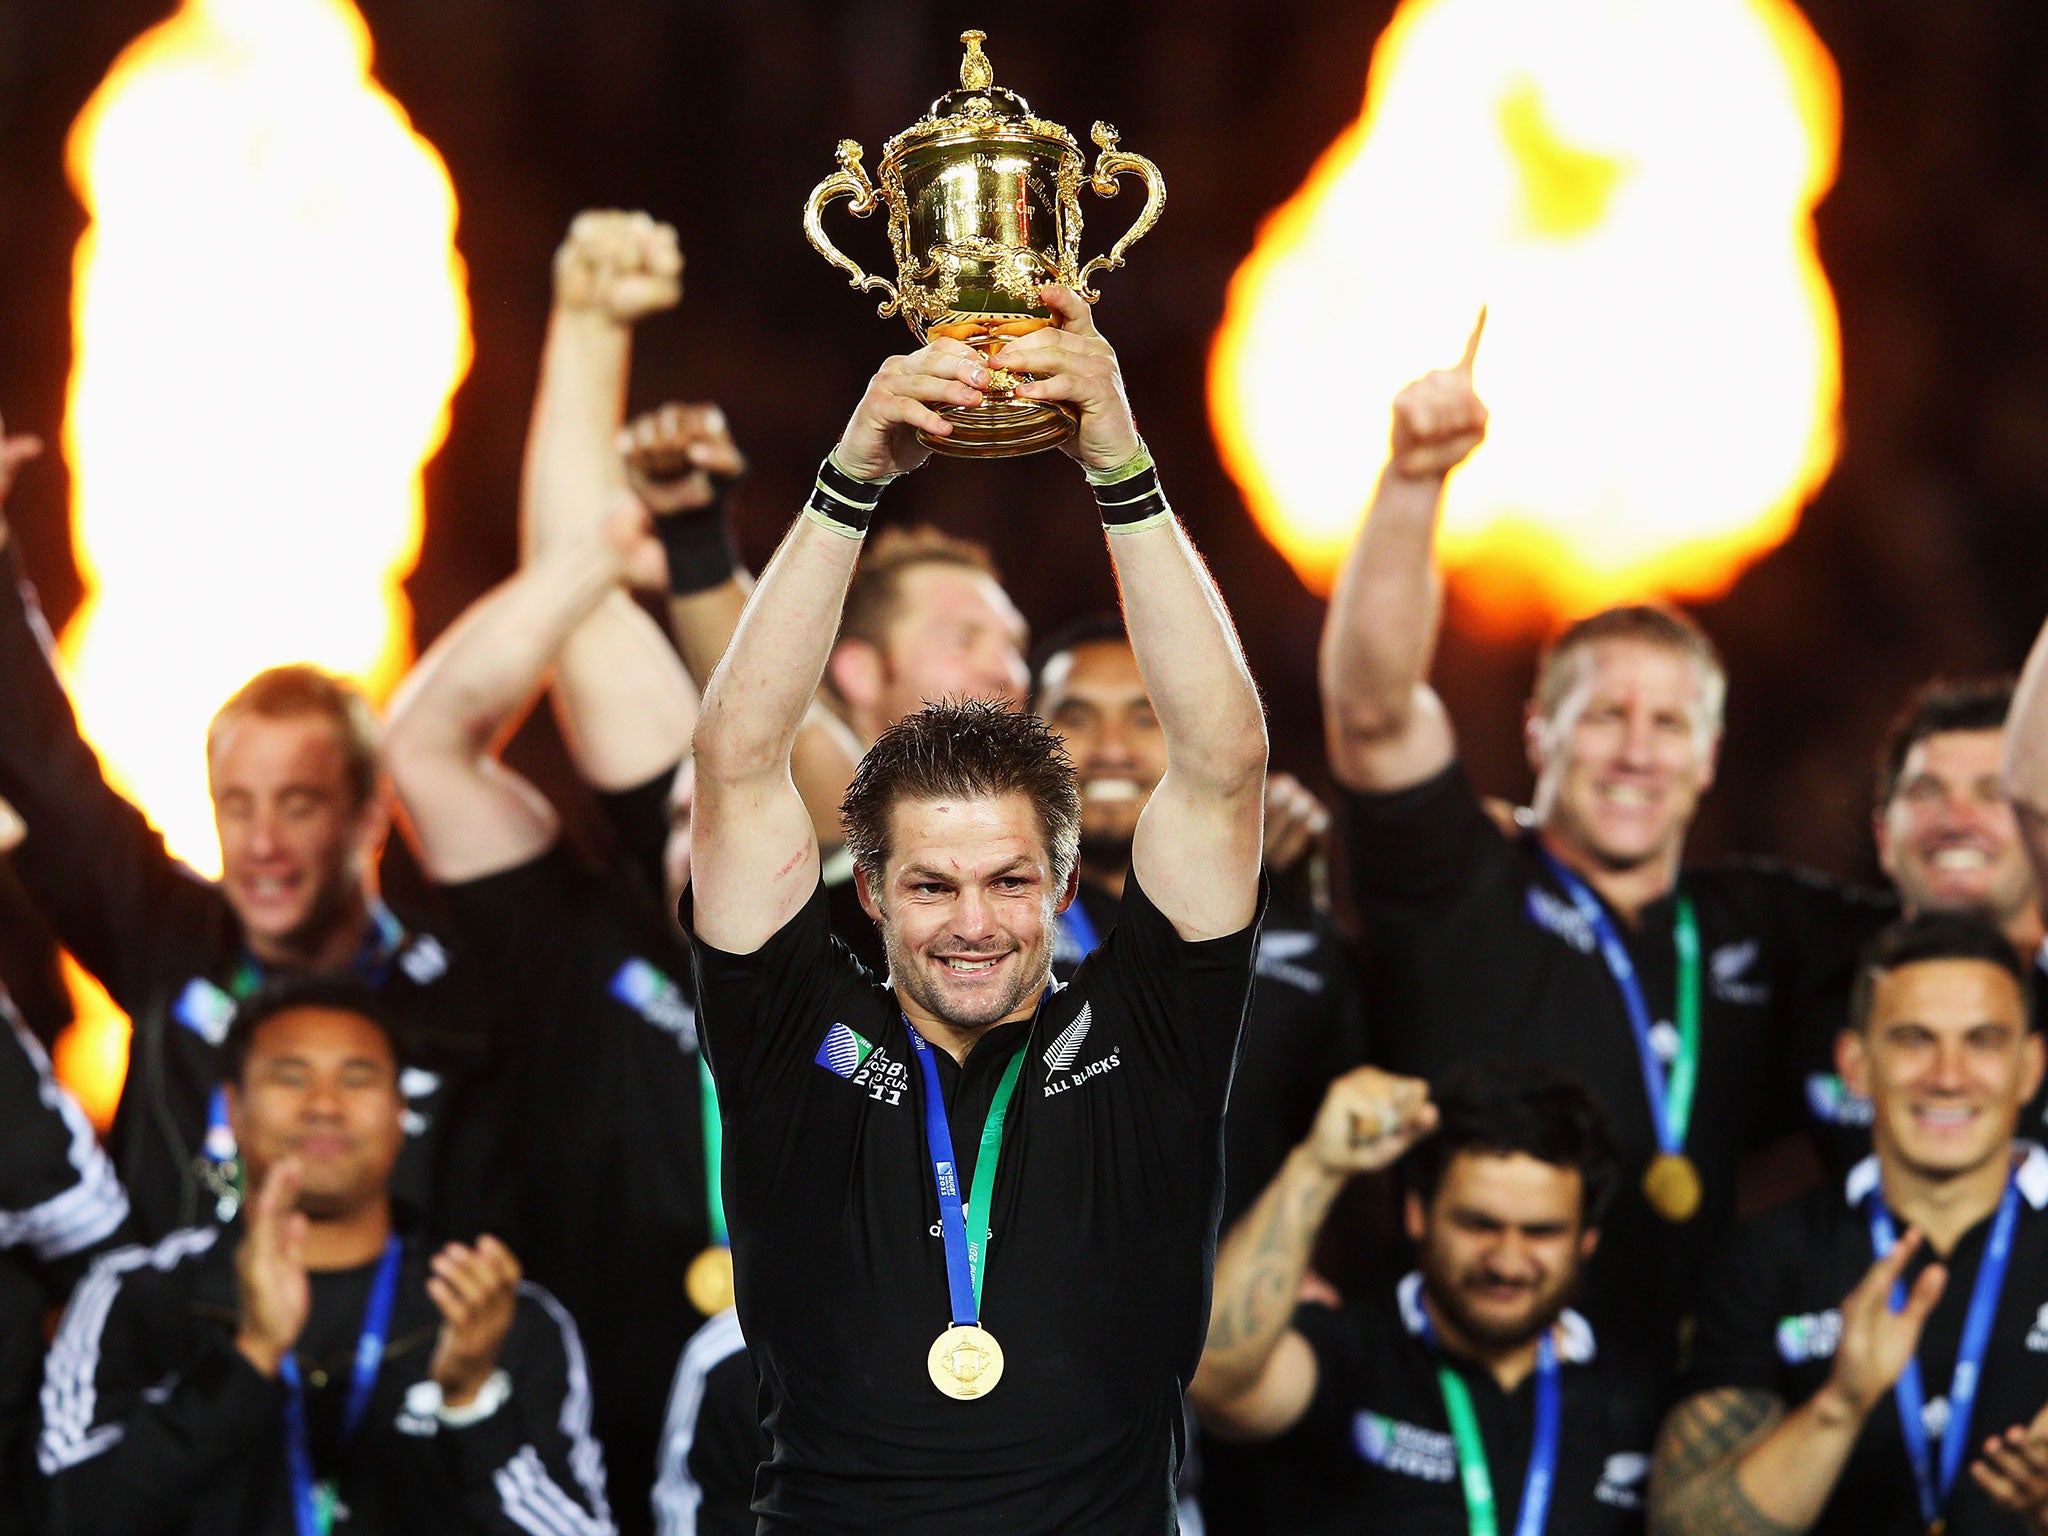 Richie McCaw celebrates as New Zealand win the 2011 Rugby World Cup